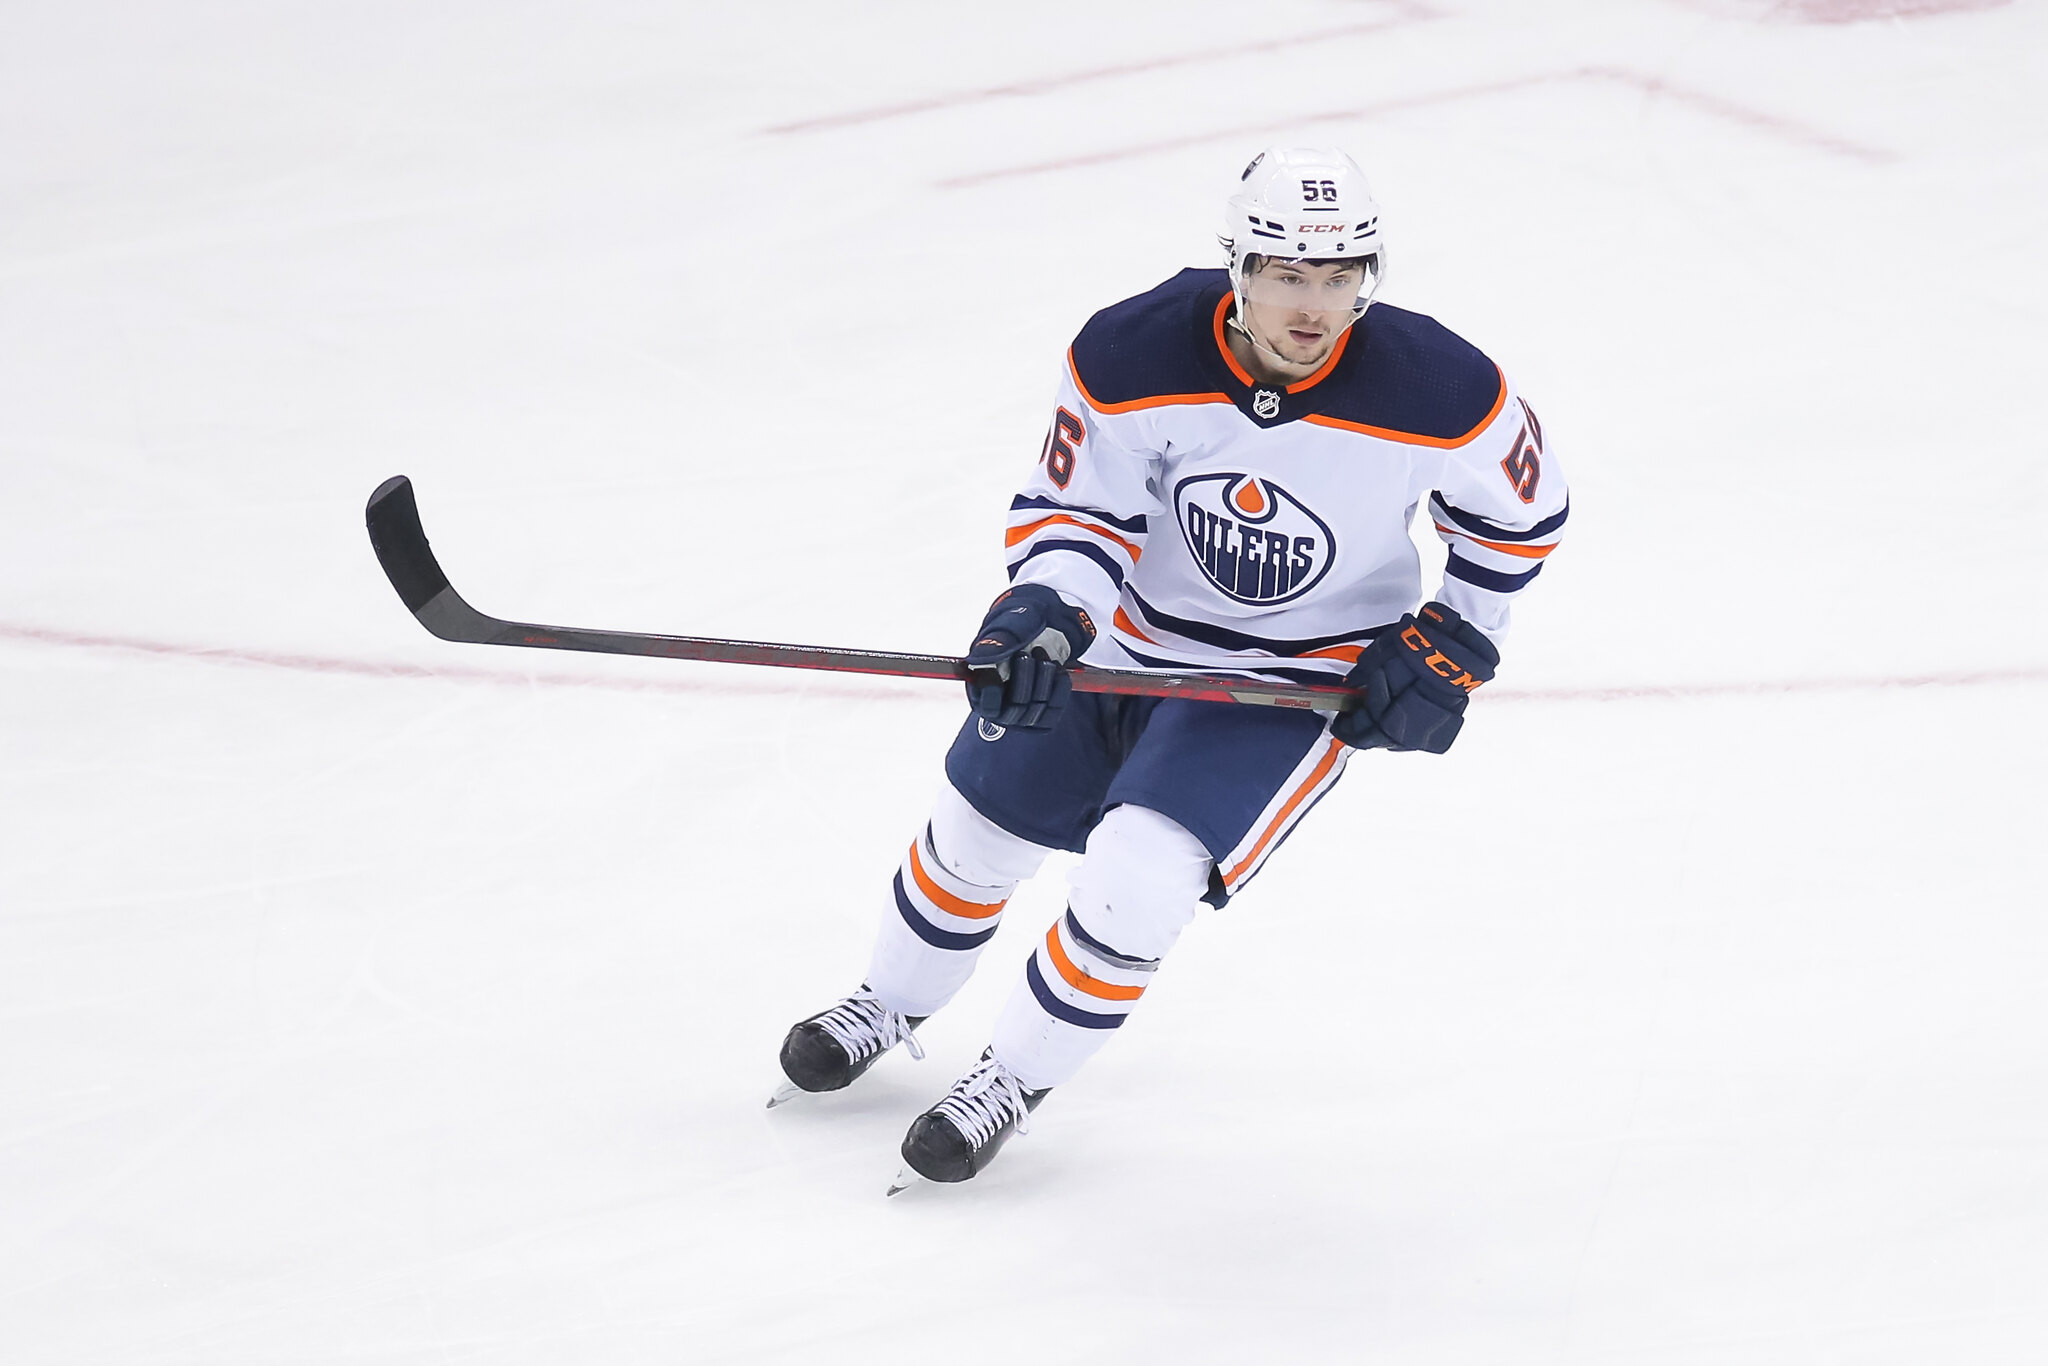 3 Takeaways as Edmonton Oilers Make Statement in OT Loss to Avalanche